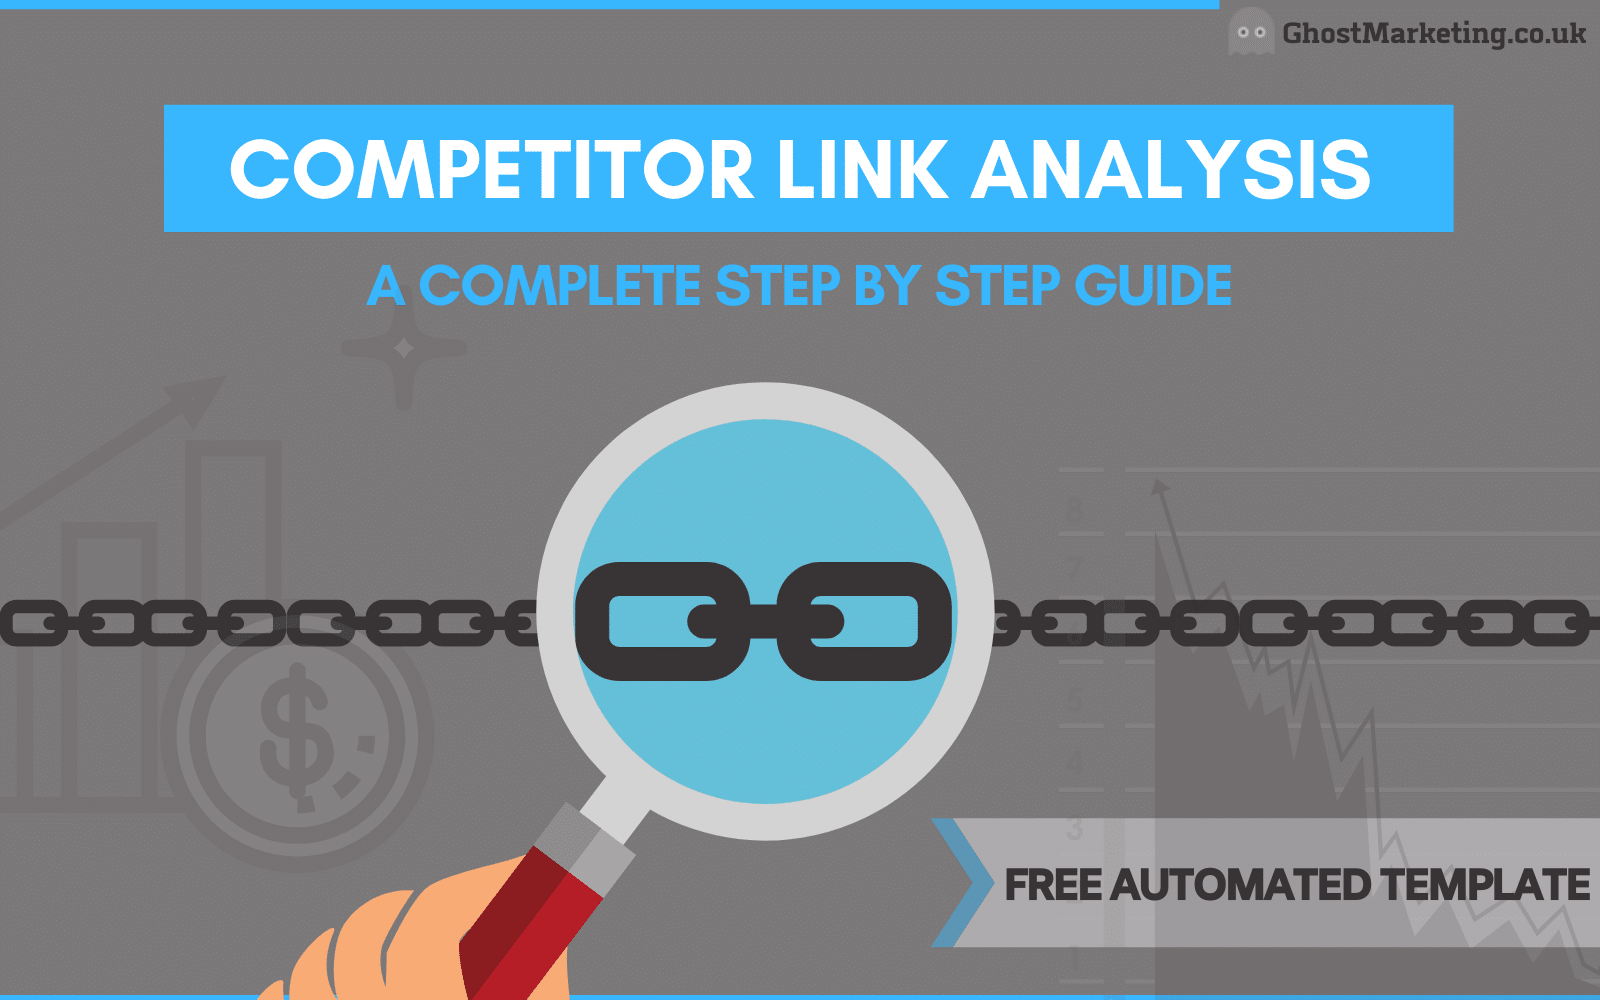 competitor link analysis guide free template - ghost marketing